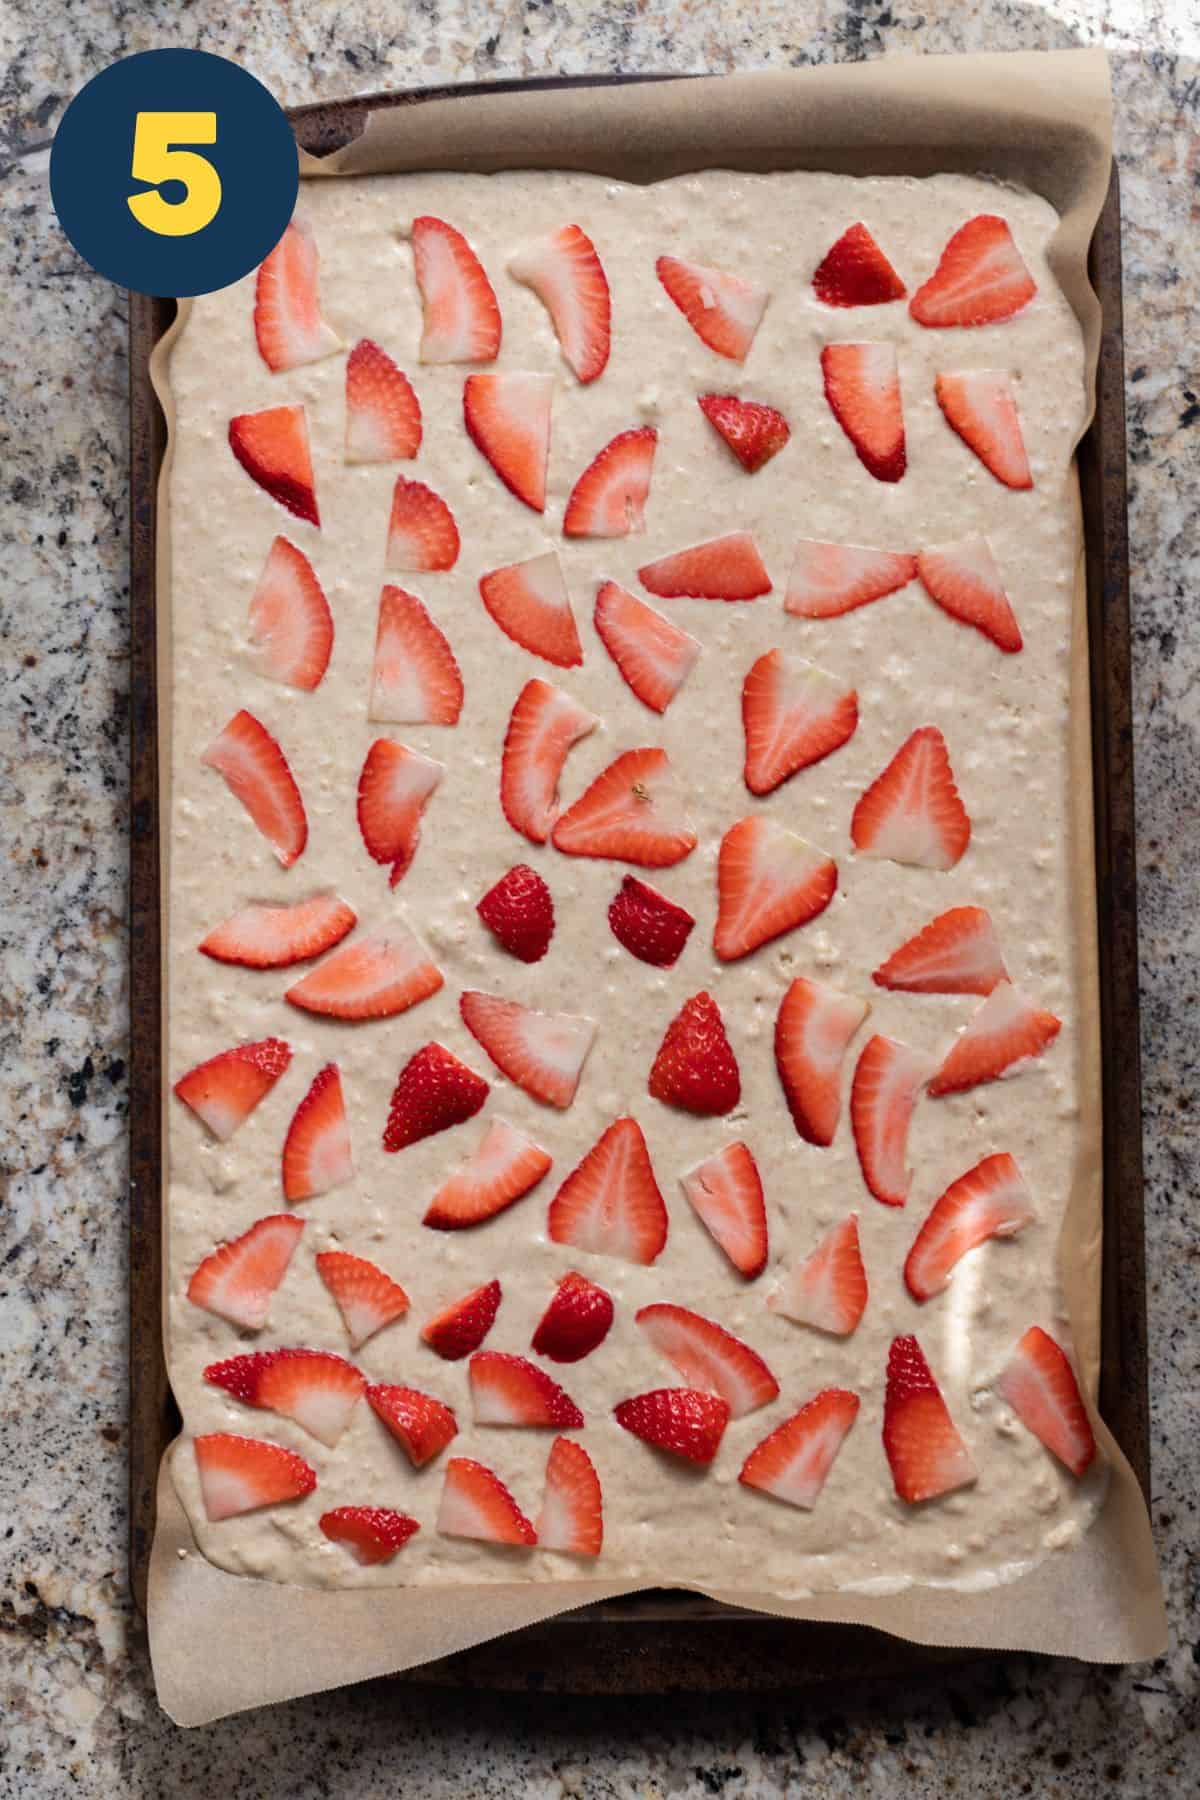 Pancake mix spread in baking sheet and topped with sliced strawberries before baking.